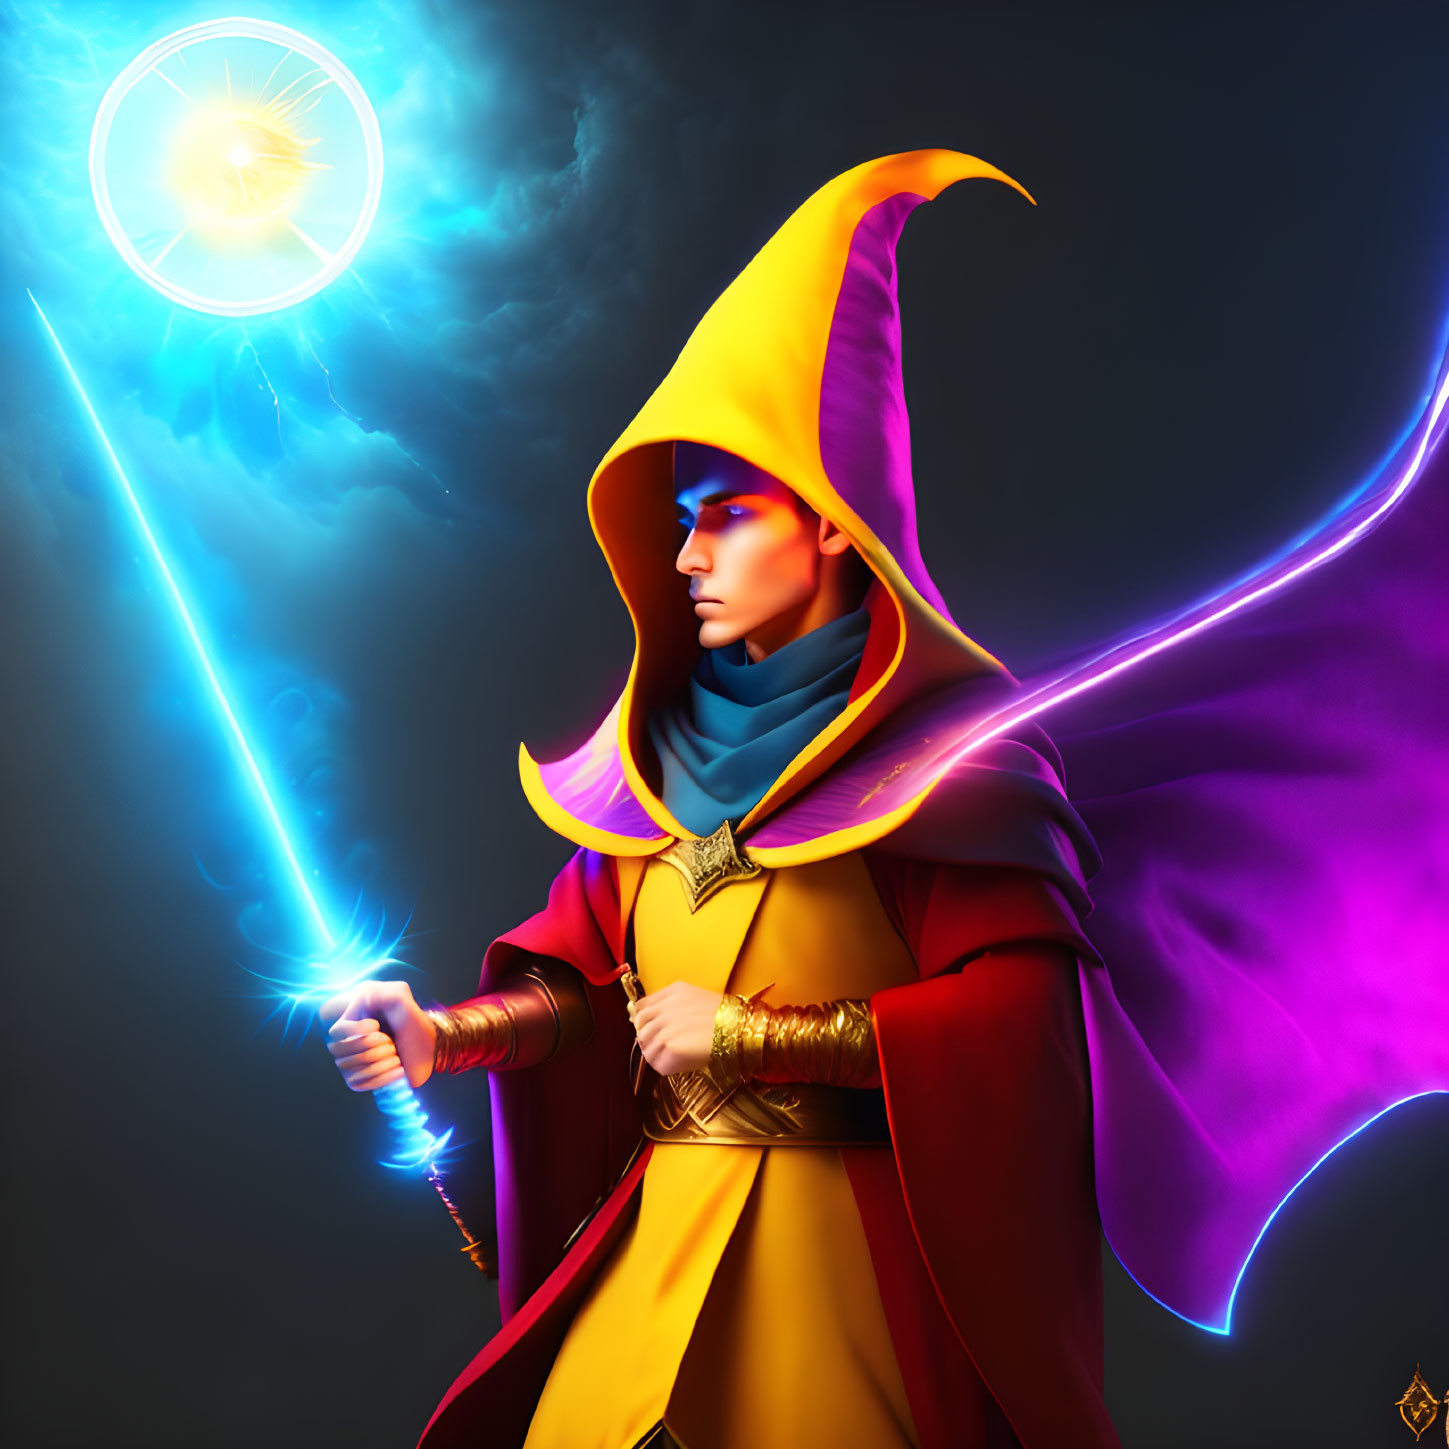 Wizard in Yellow Cloak with Blue Staff and Magic Orb on Dark Background